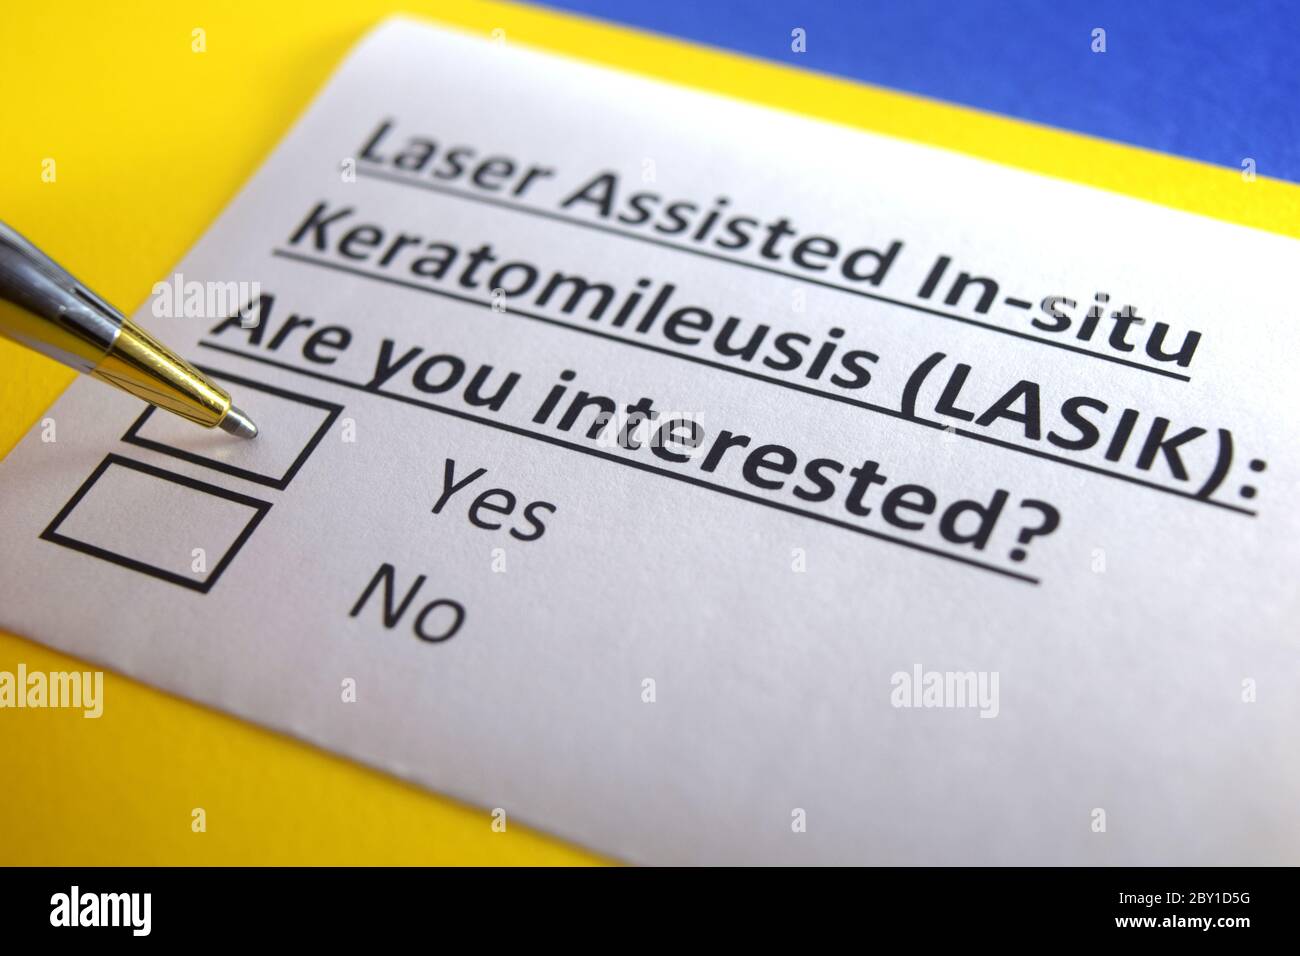 One person is answering question about laser assisted in-situ keratomileusis. Stock Photo